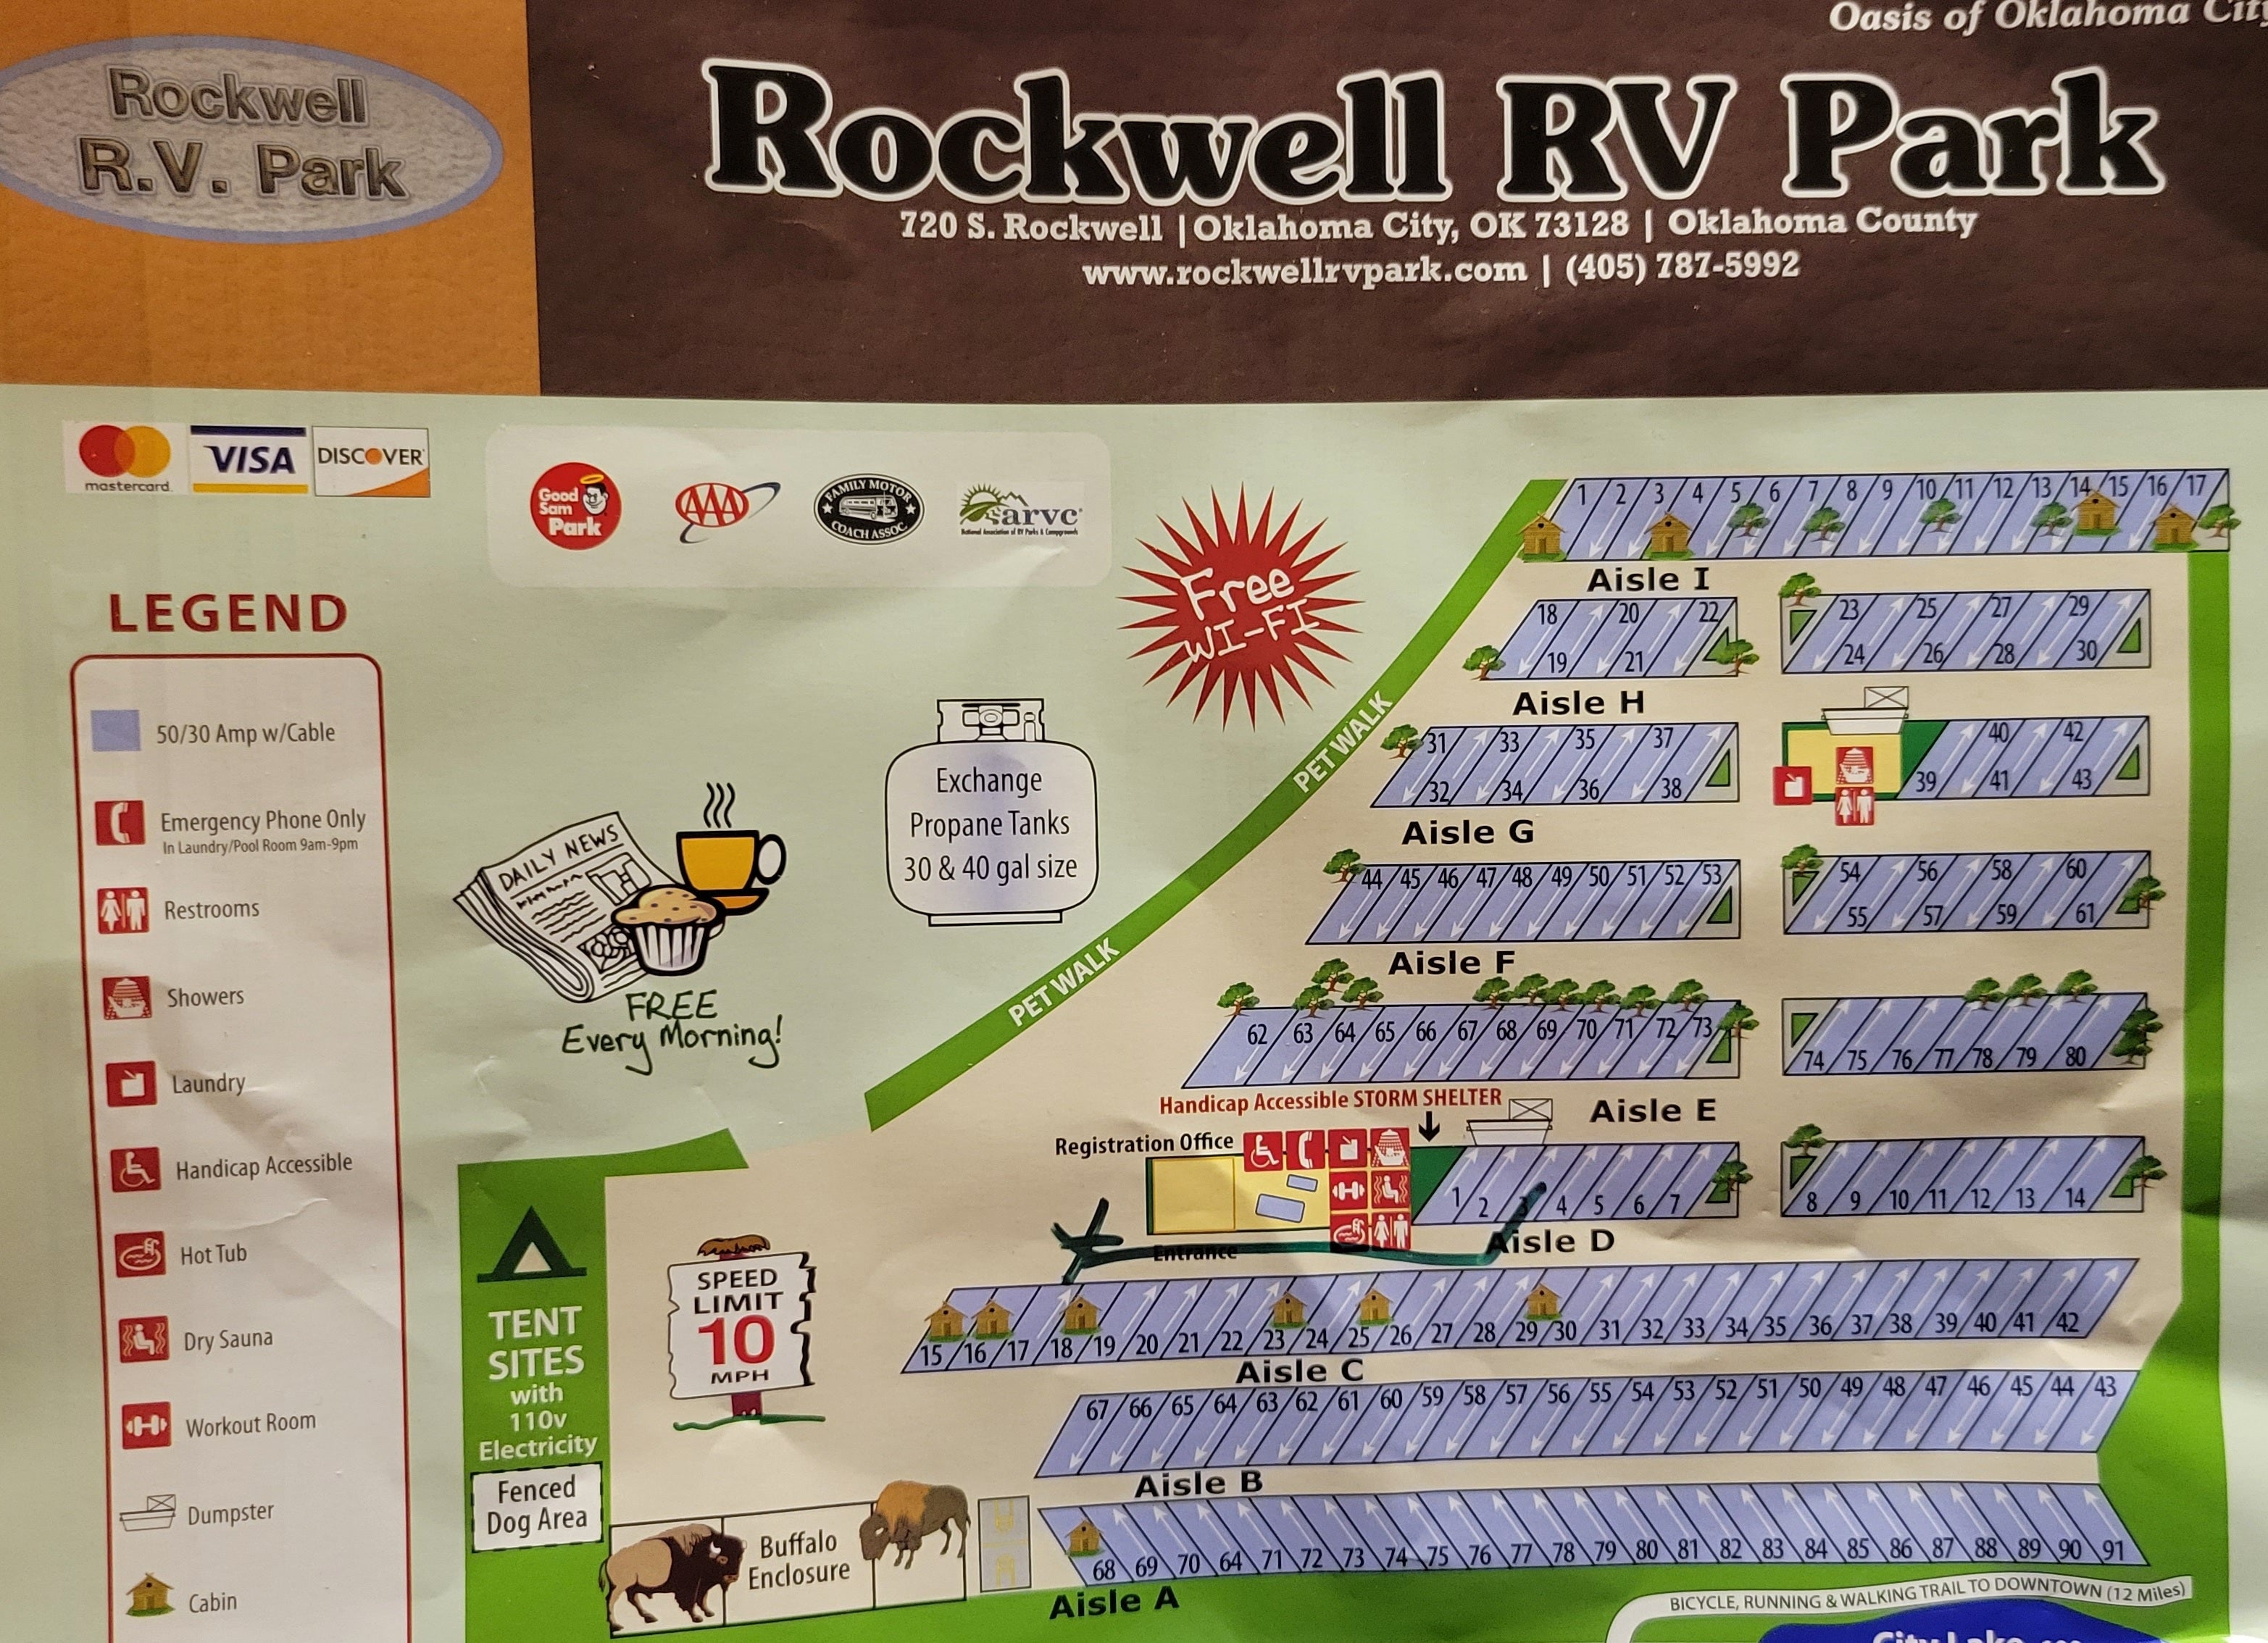 Camper submitted image from Rockwell RV Park - 4